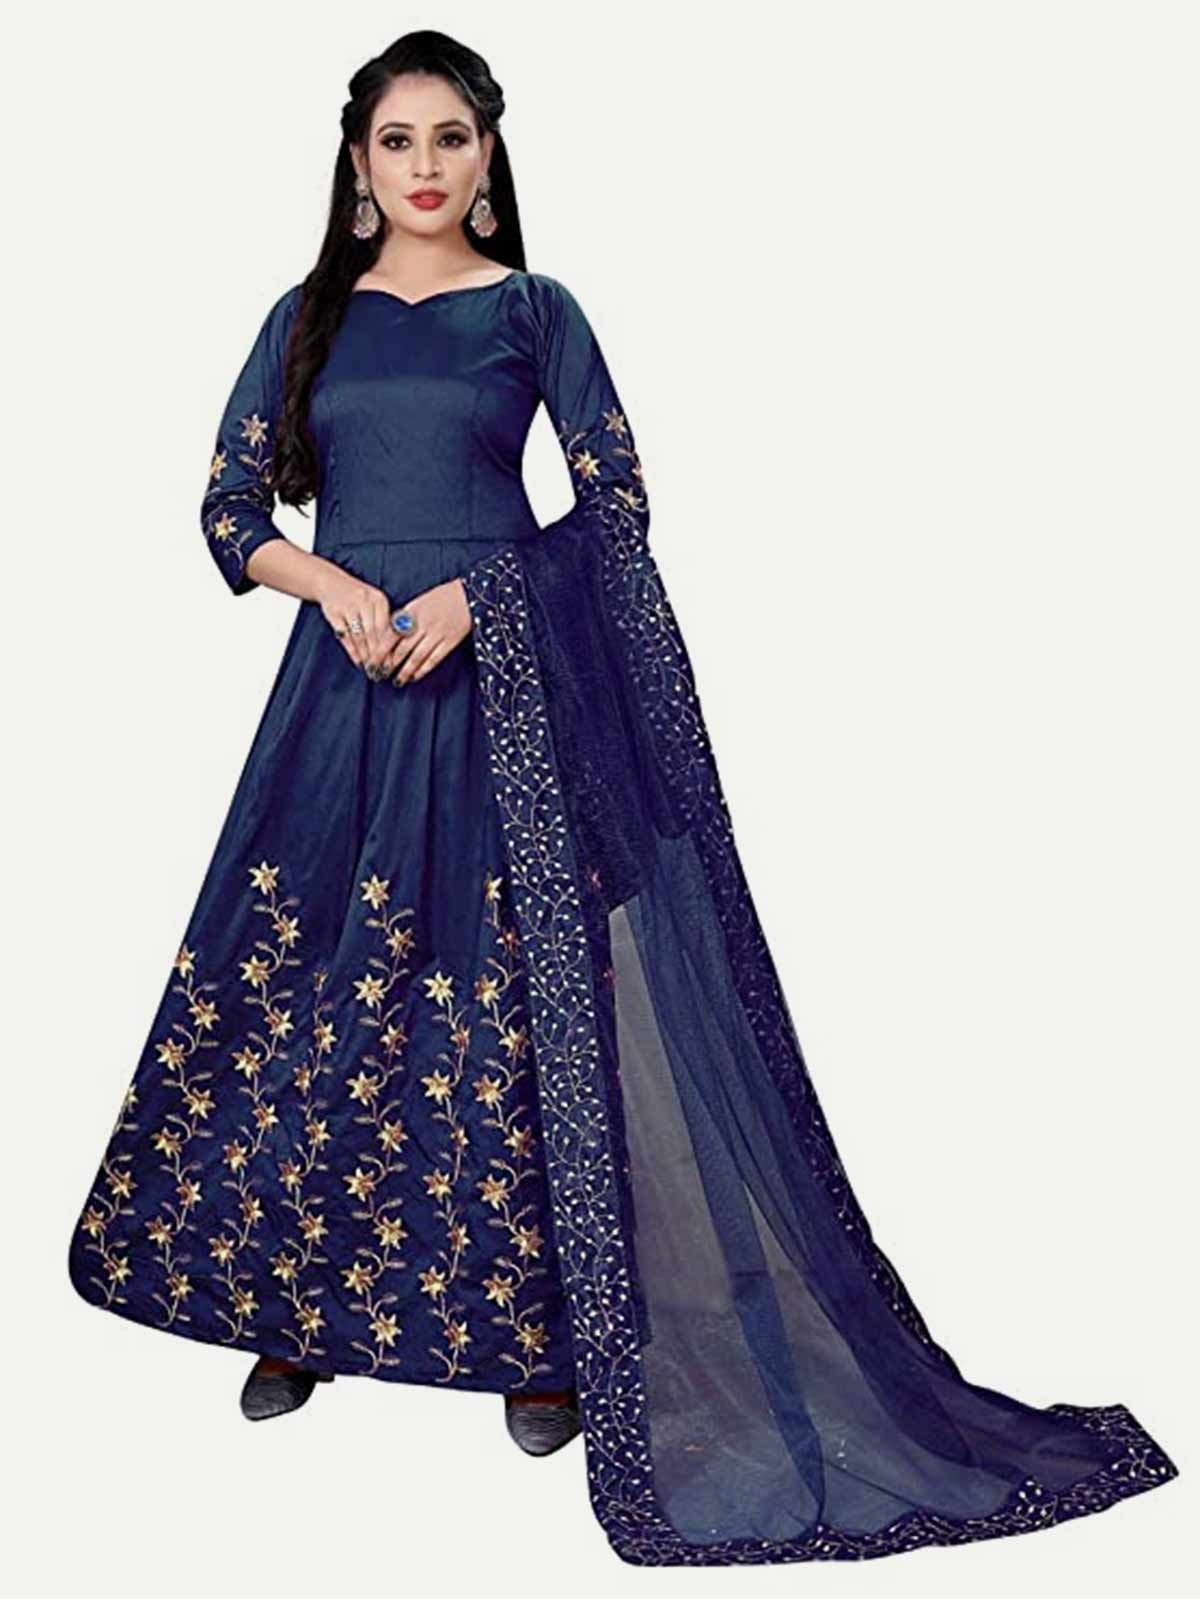 blue gown under 500 rupees